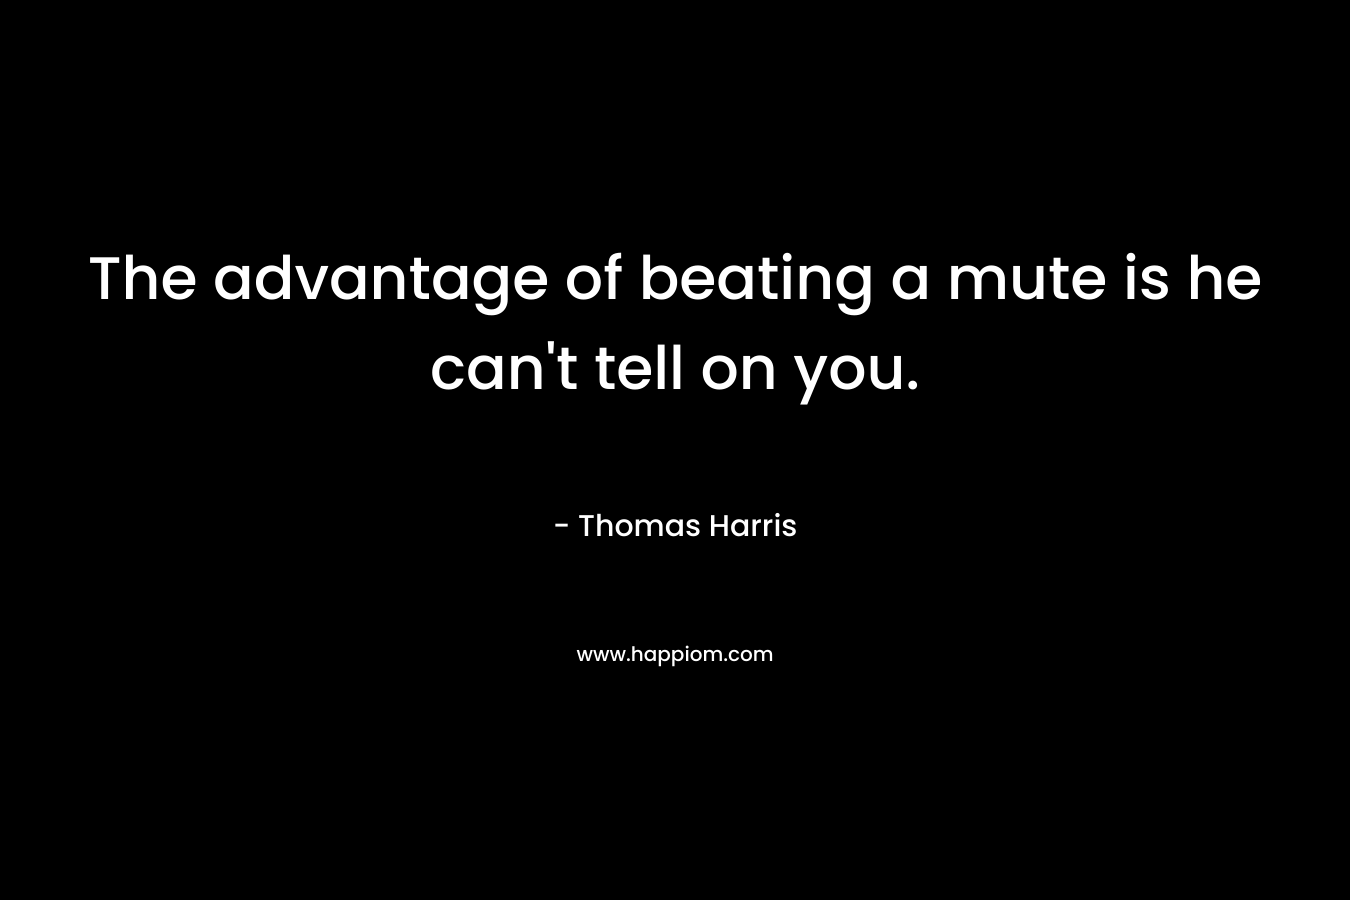 The advantage of beating a mute is he can’t tell on you. – Thomas Harris